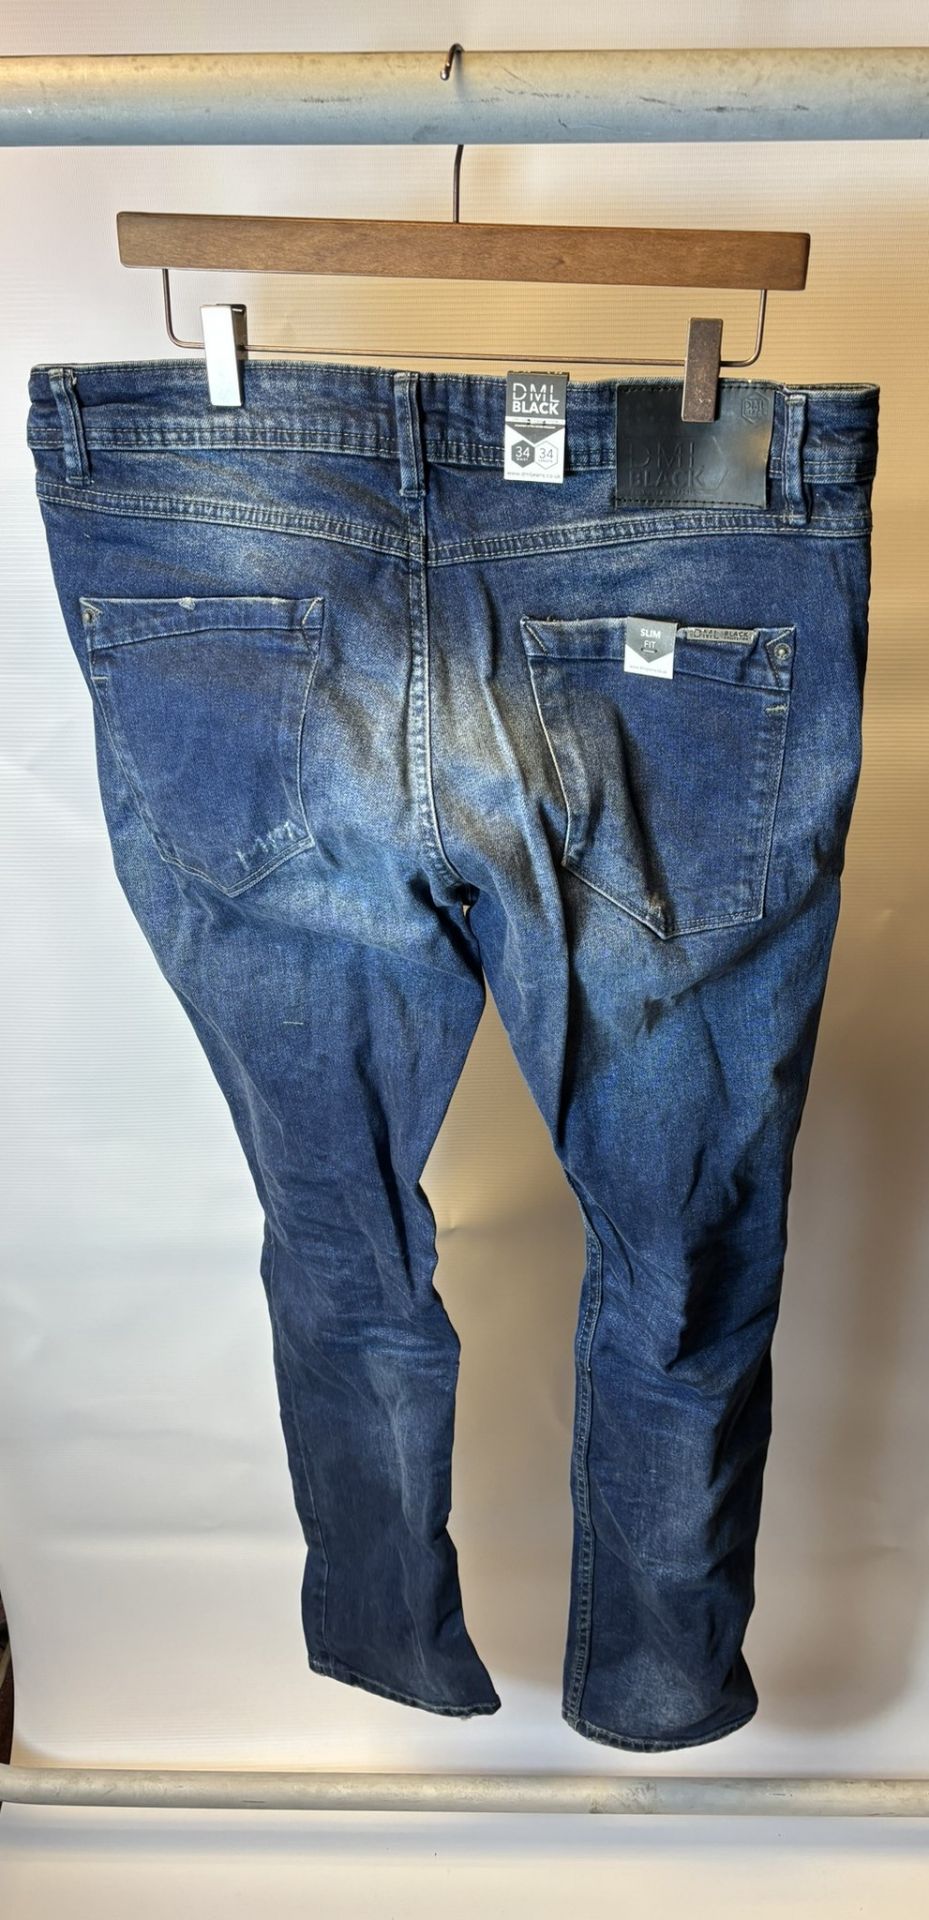 13 x Pairs Of various Sized DML Jeans Prophecy & Voyage Blue Jeans - Image 20 of 39